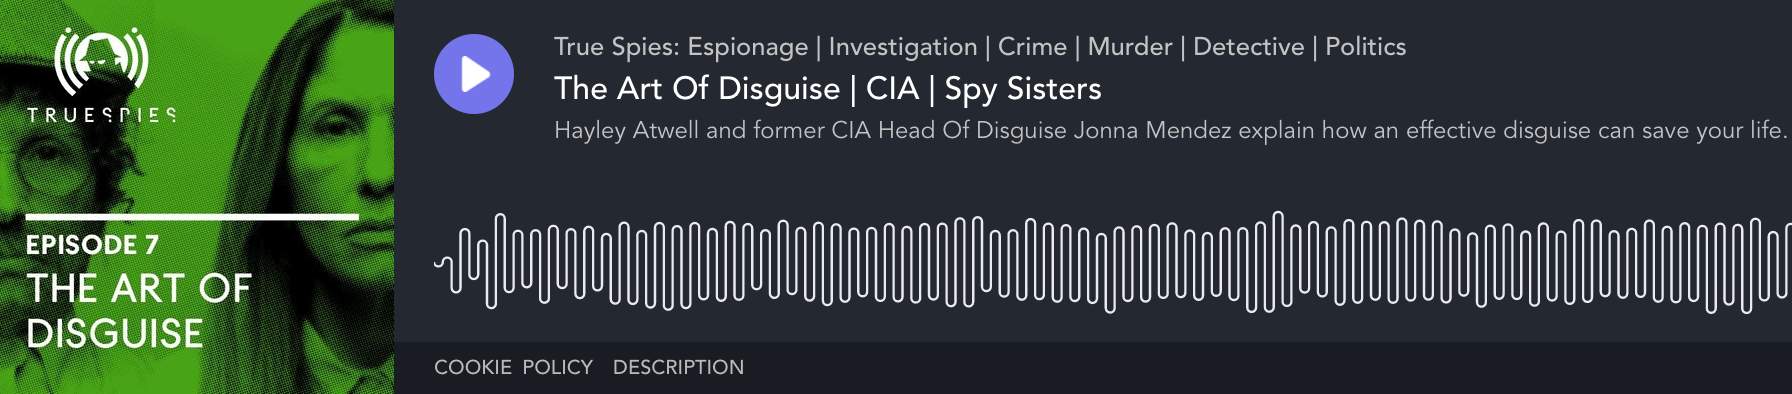 The Art of Disguise, True Spies Podcast